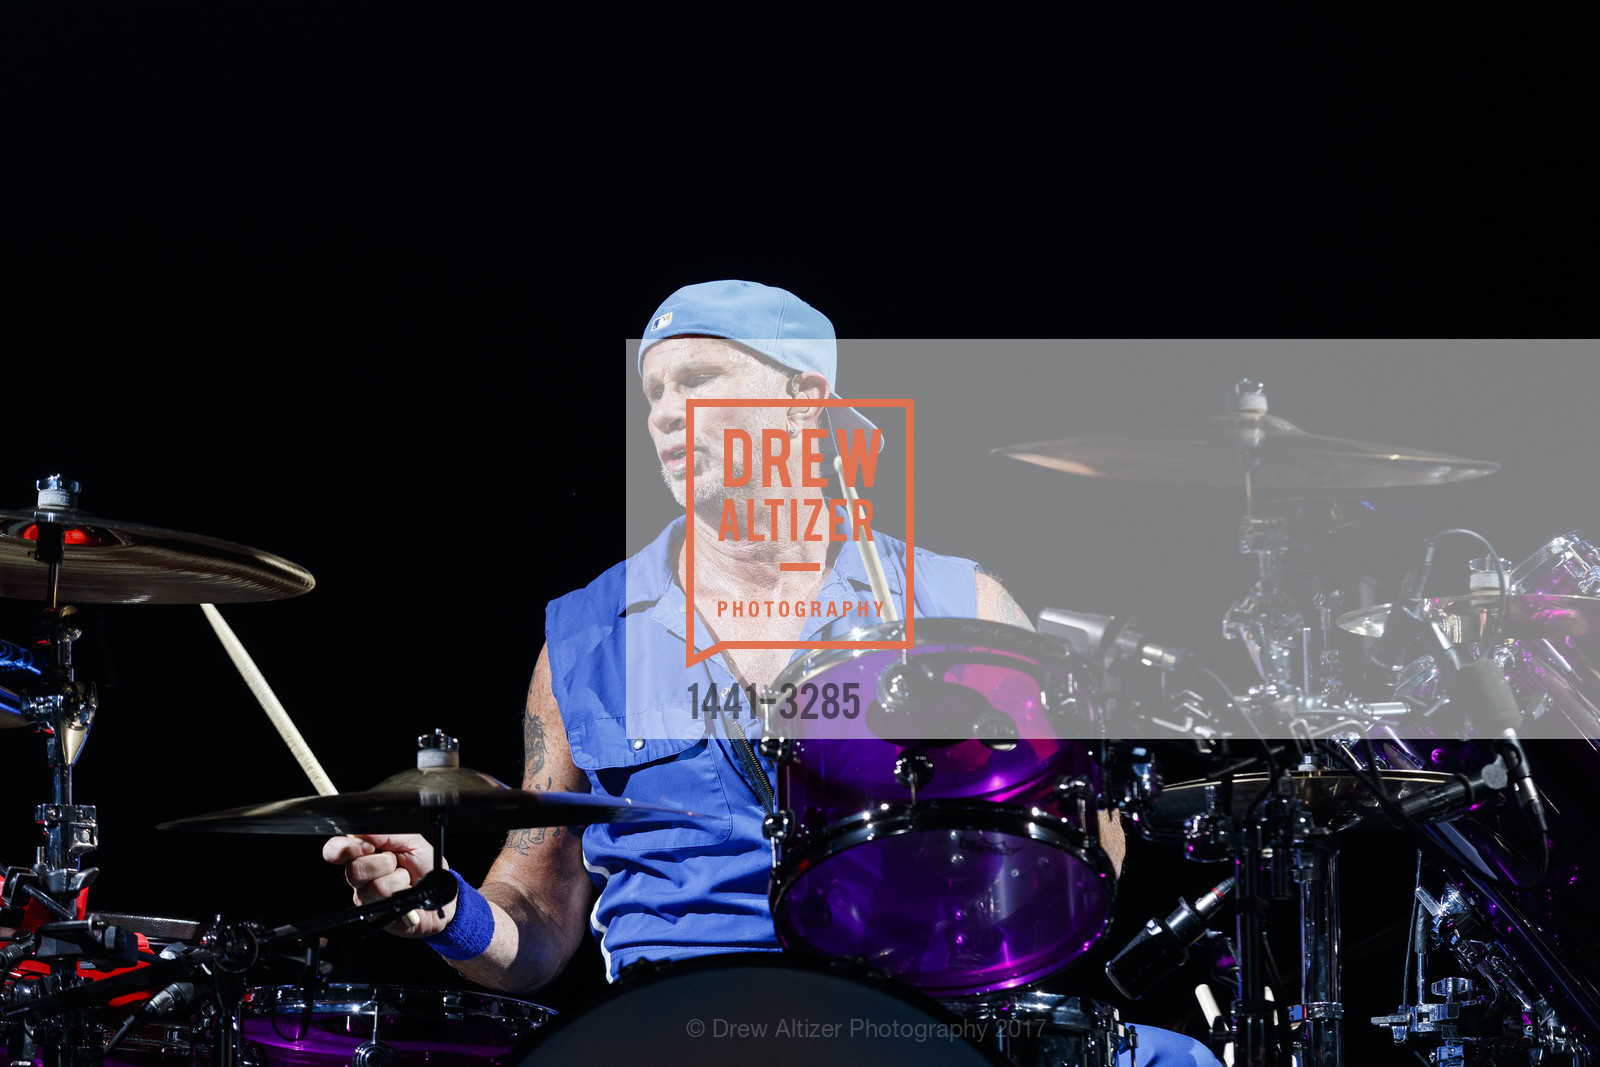 The Red Hot Chili Peppers, Photo #1441-3285